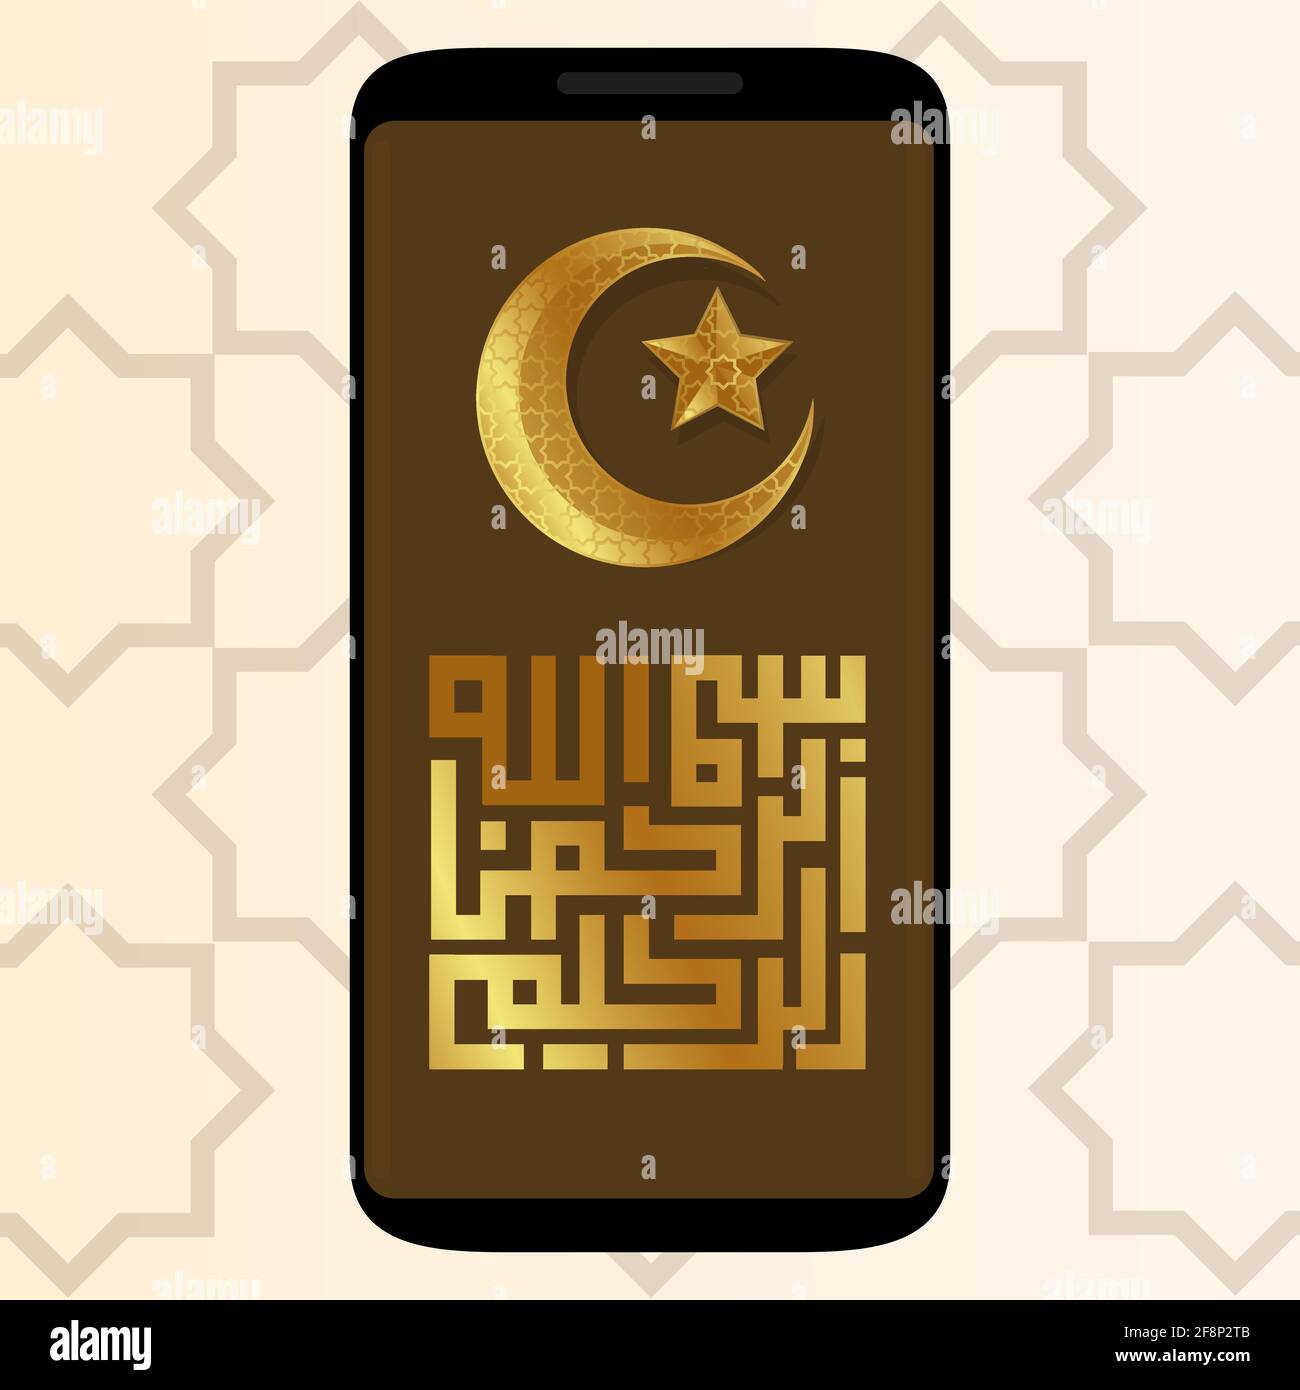 bismillah calligraphy gold and crescent moon in smartphone cell phone gadget screen Islam pattern graphic Stock Vector